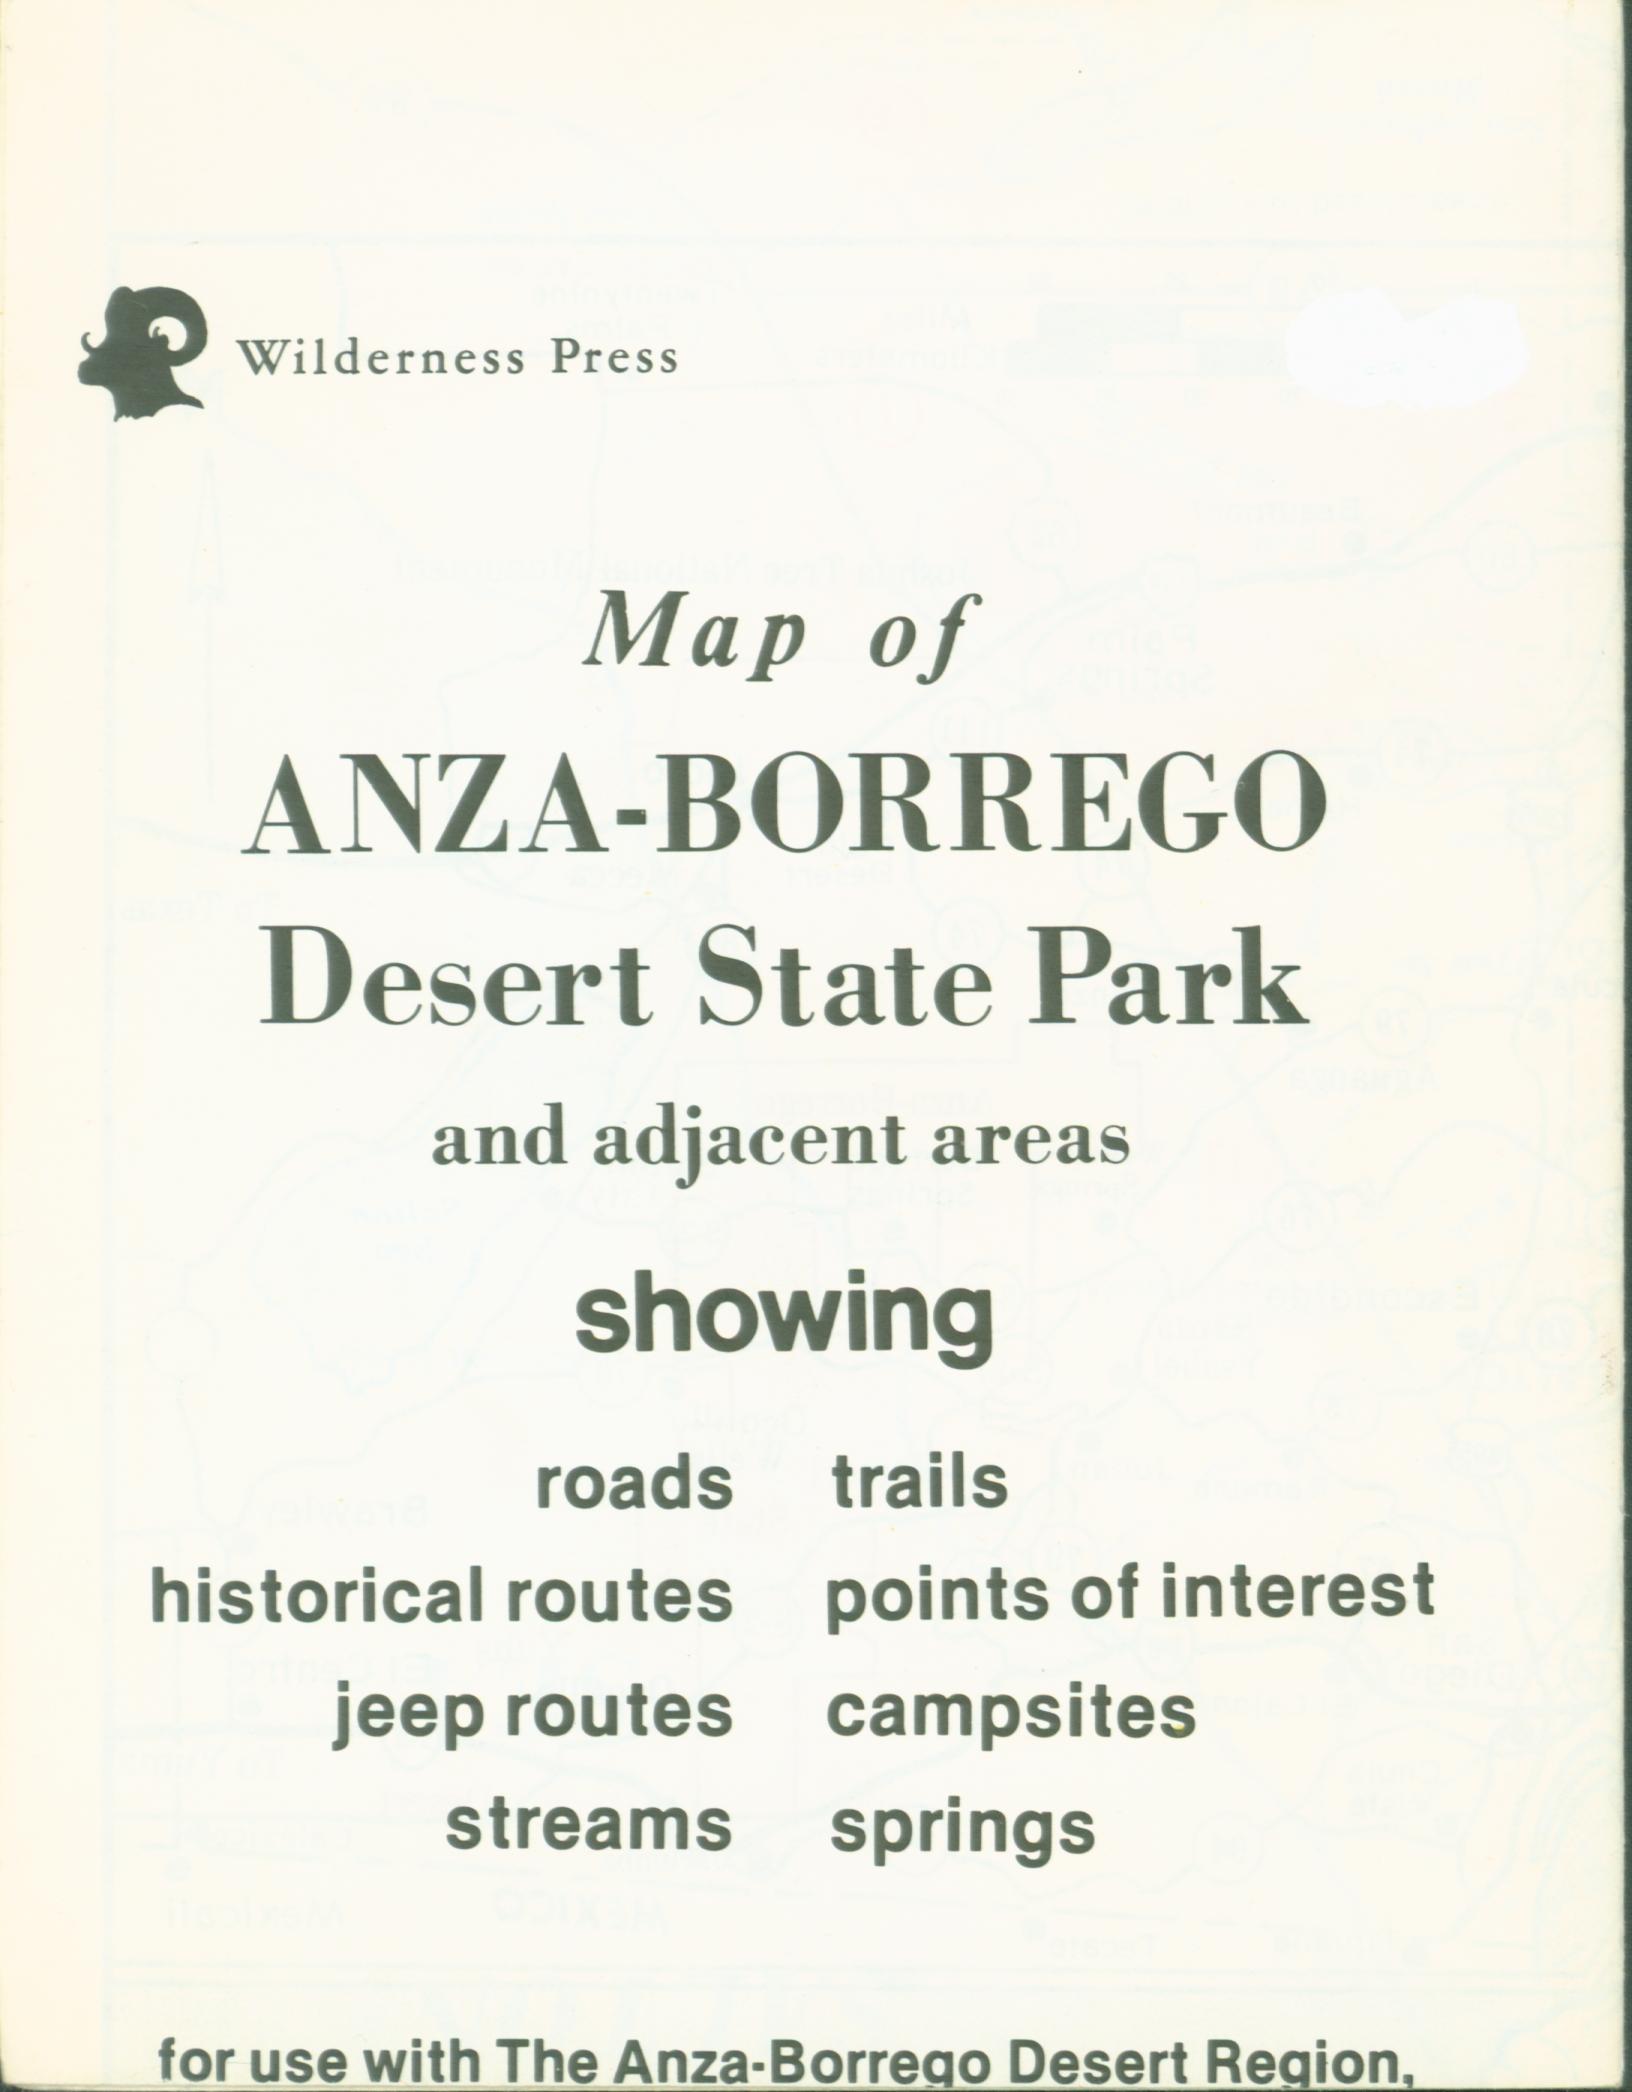 MAP OF ANZA-BORREGO DESERT STATE PARK and adjacent areas (CA).